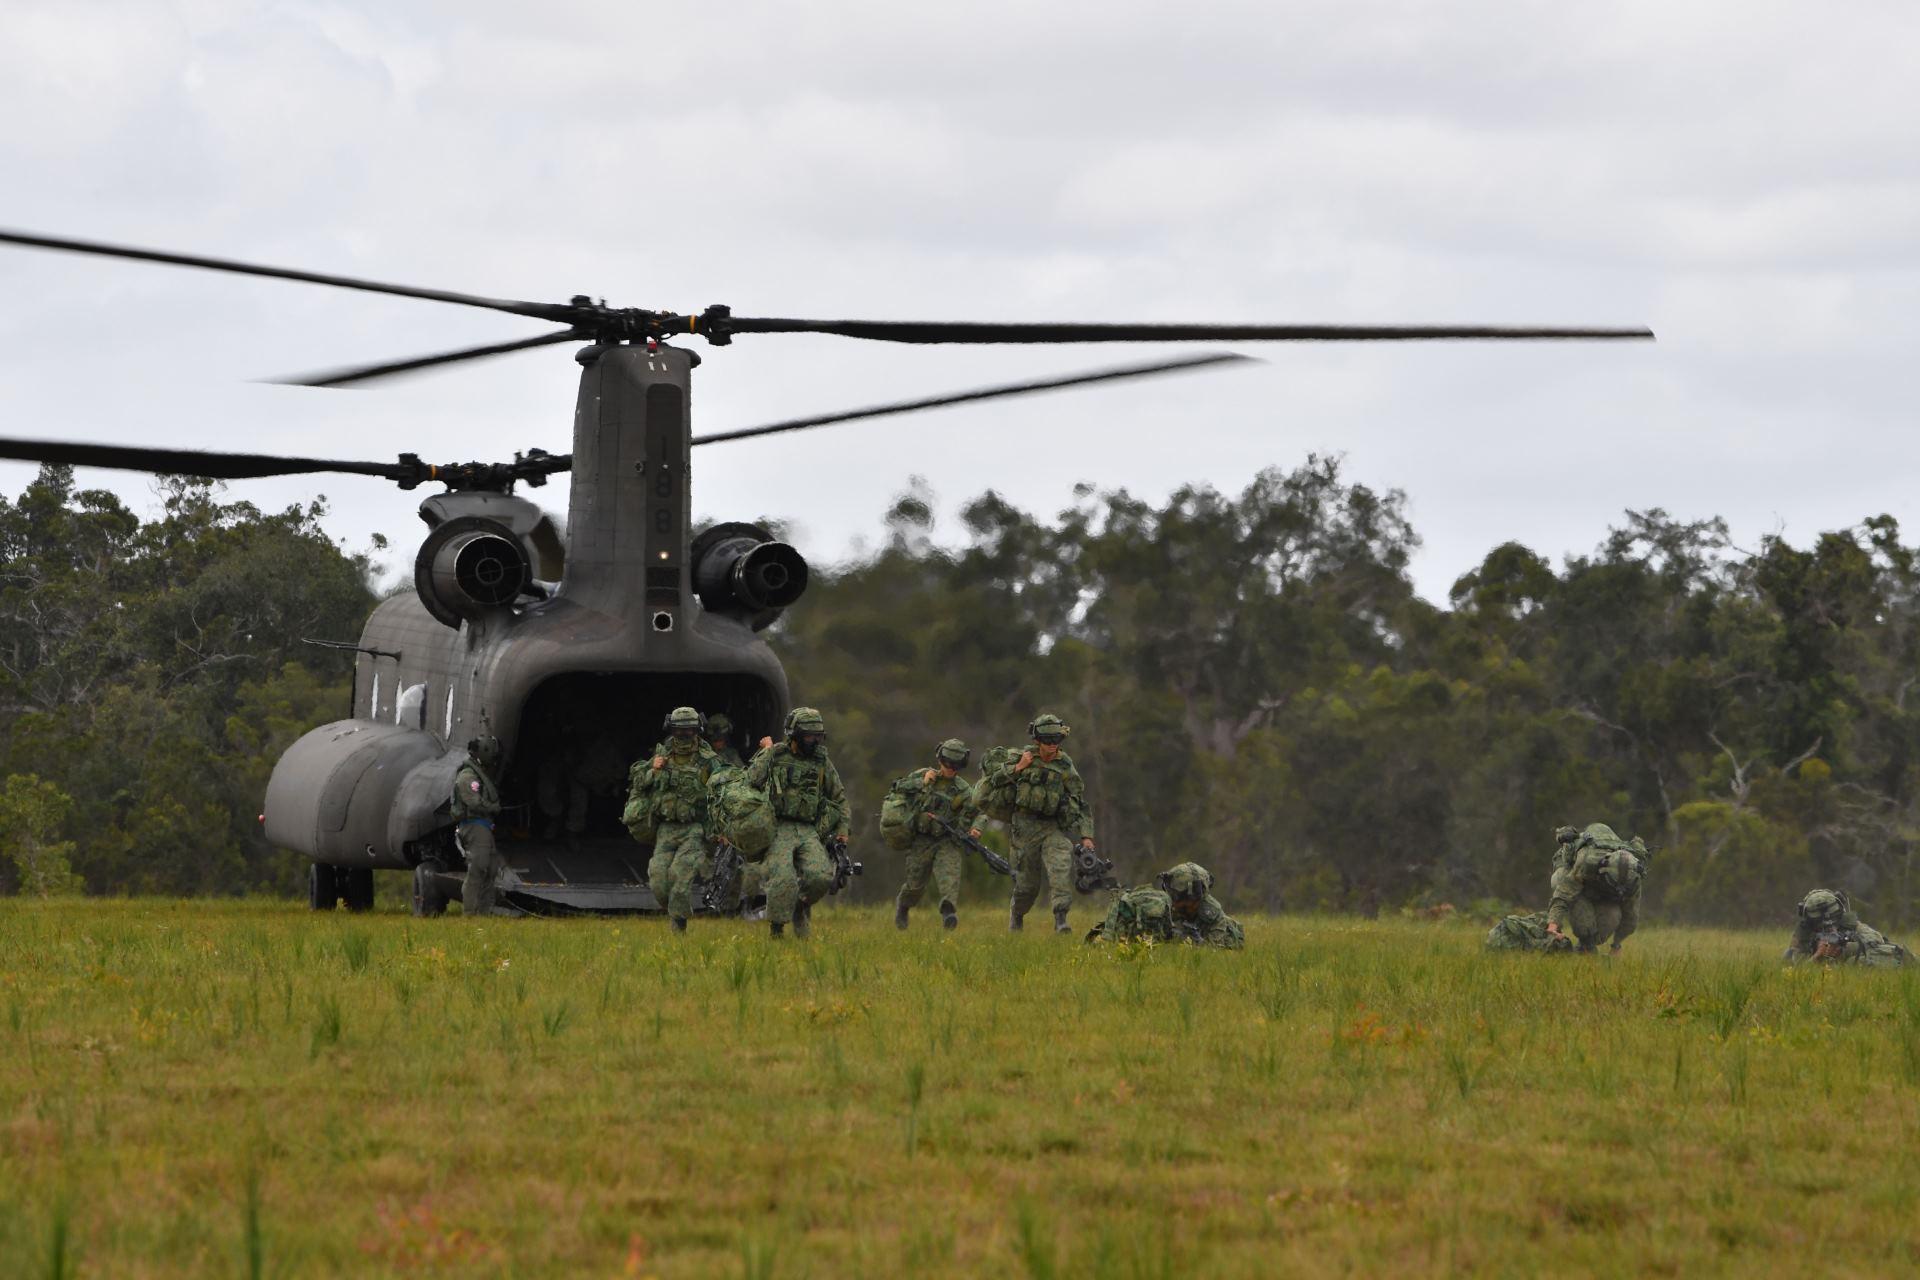 Exercise troops disembarking from the Chinook helicopter during a troop insertion mission during Exercise Trident.